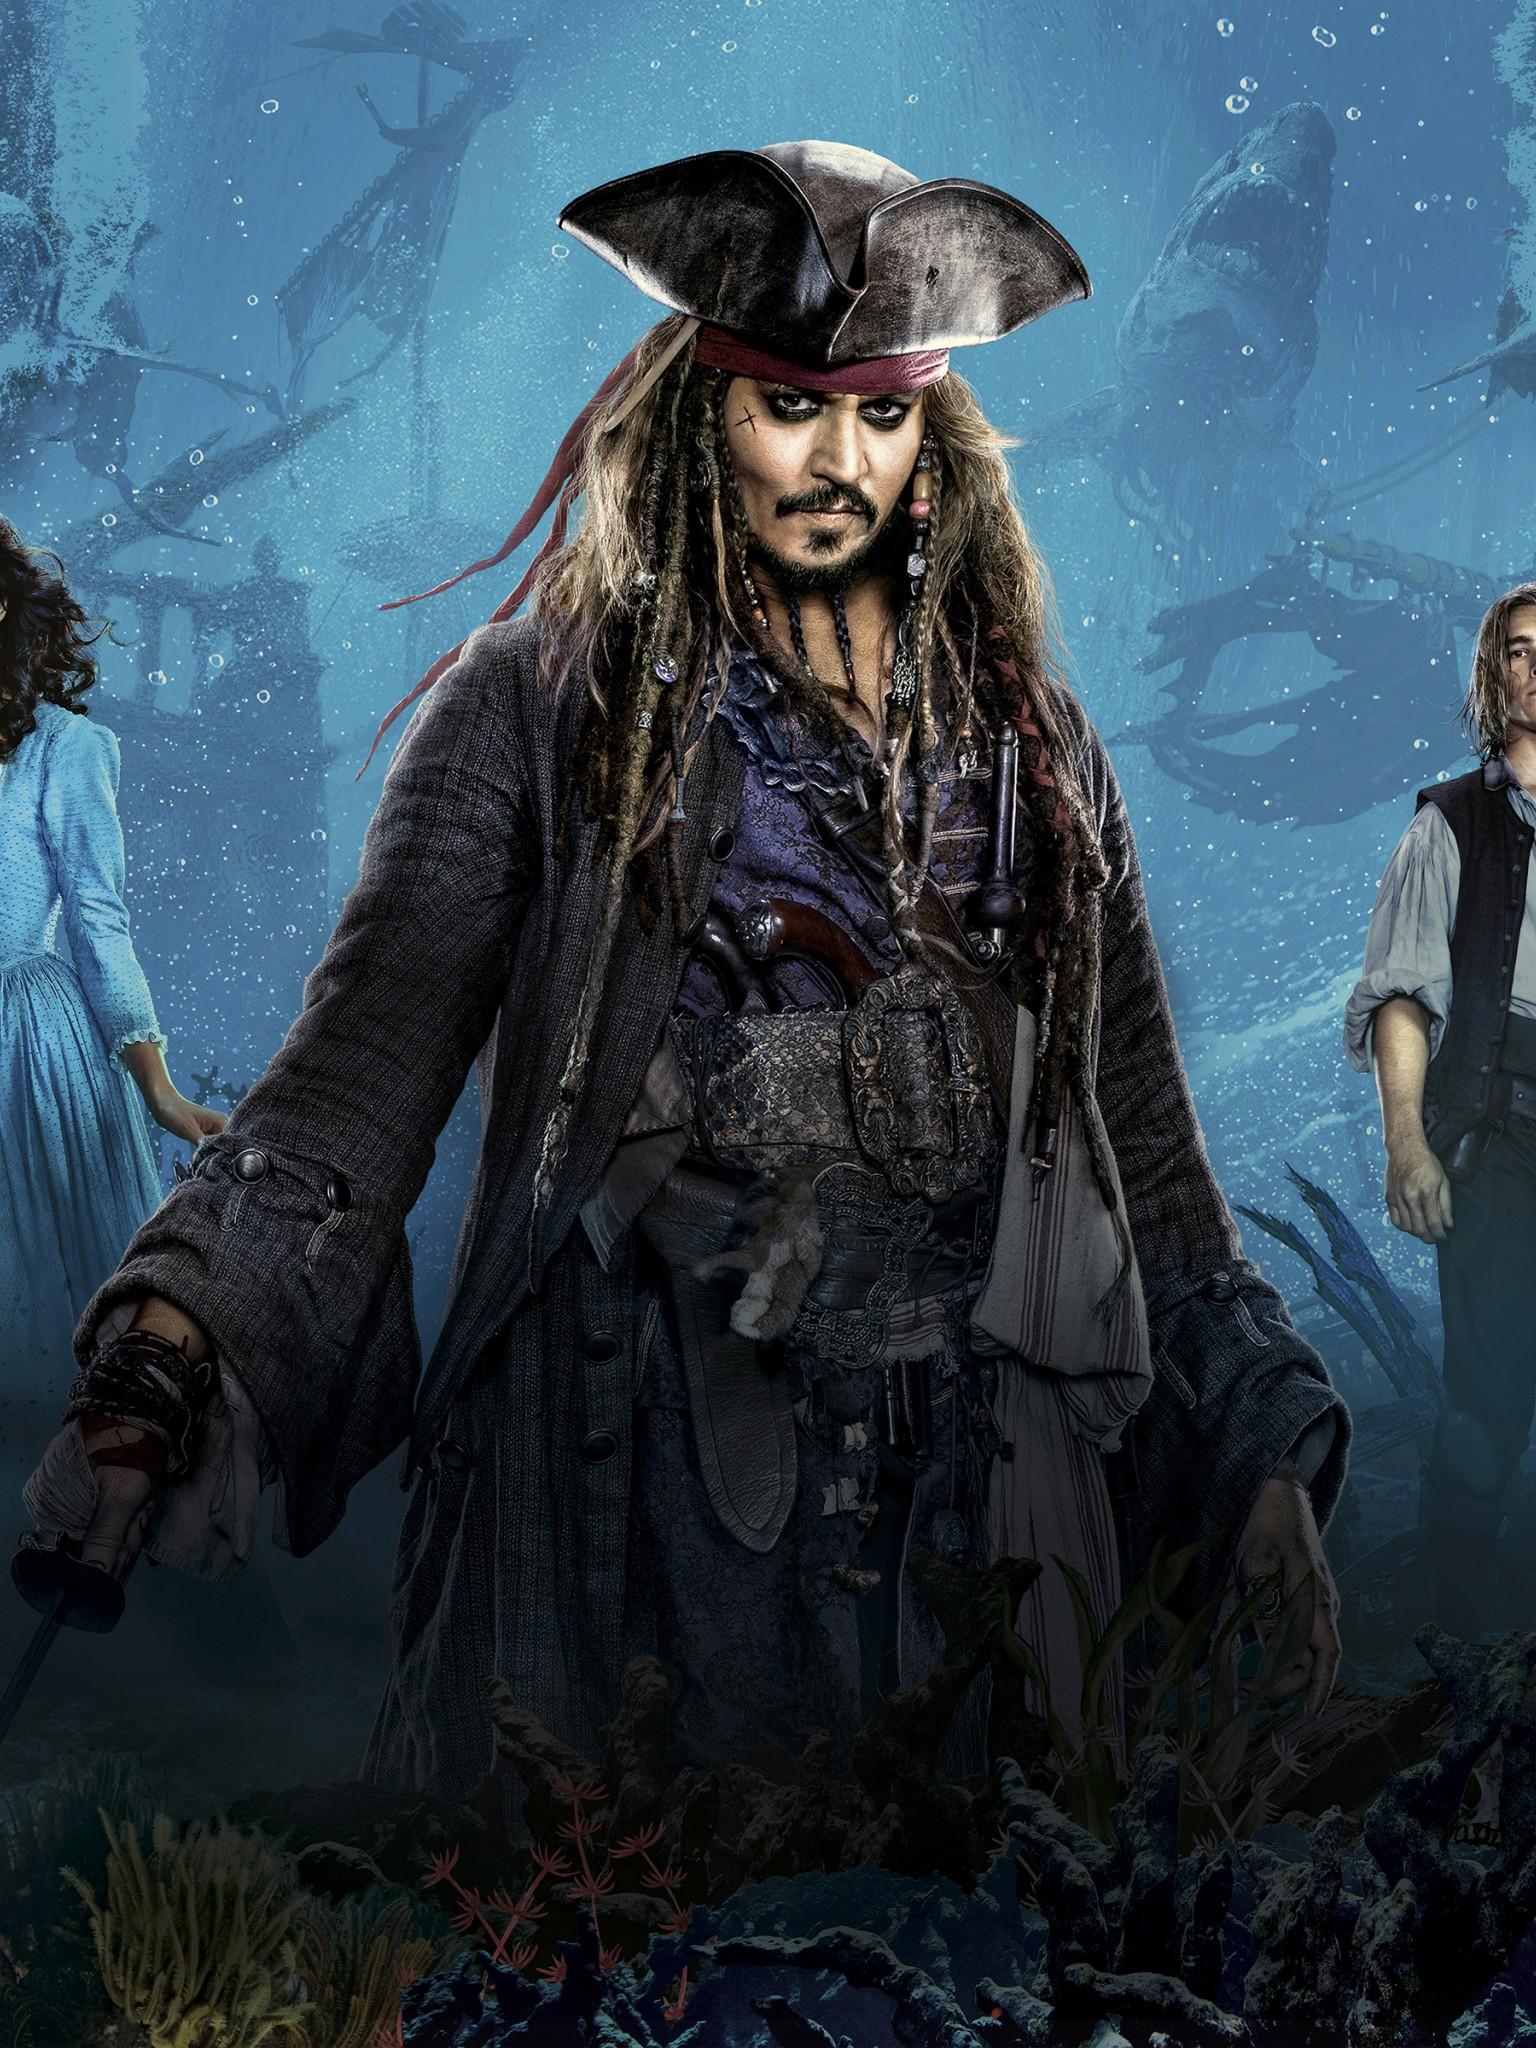 Pirates of The Caribbean Wallpaper for Desktop and Mobiles